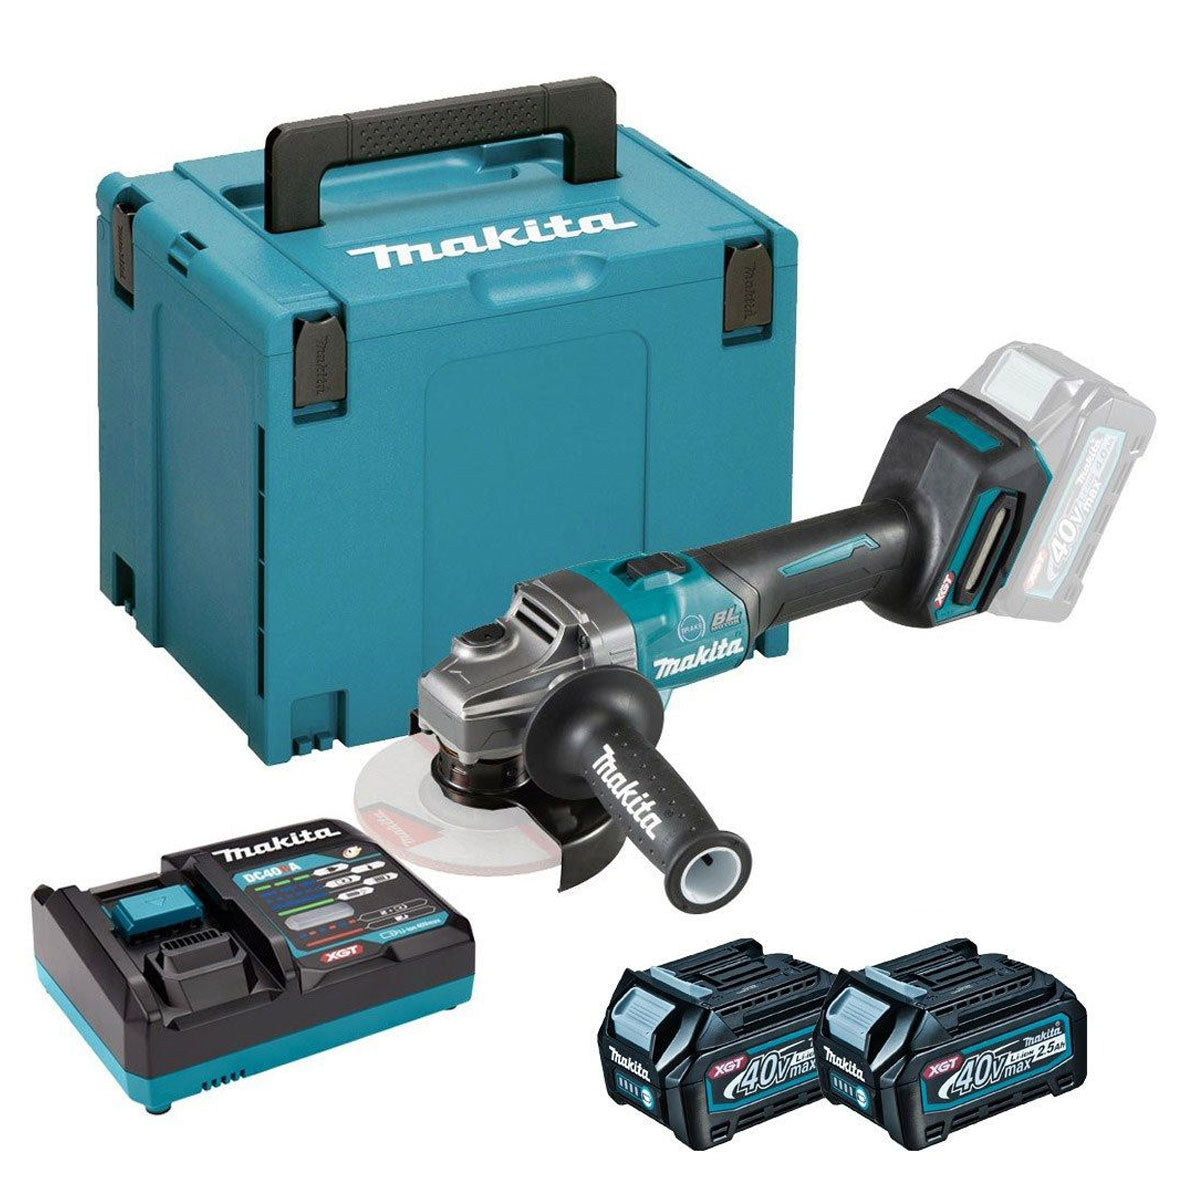 Makita GA005GD201 40V XGT Brushless 125mm Angle Grinder With 2 x 2.5Ah Battery, Charger & Case